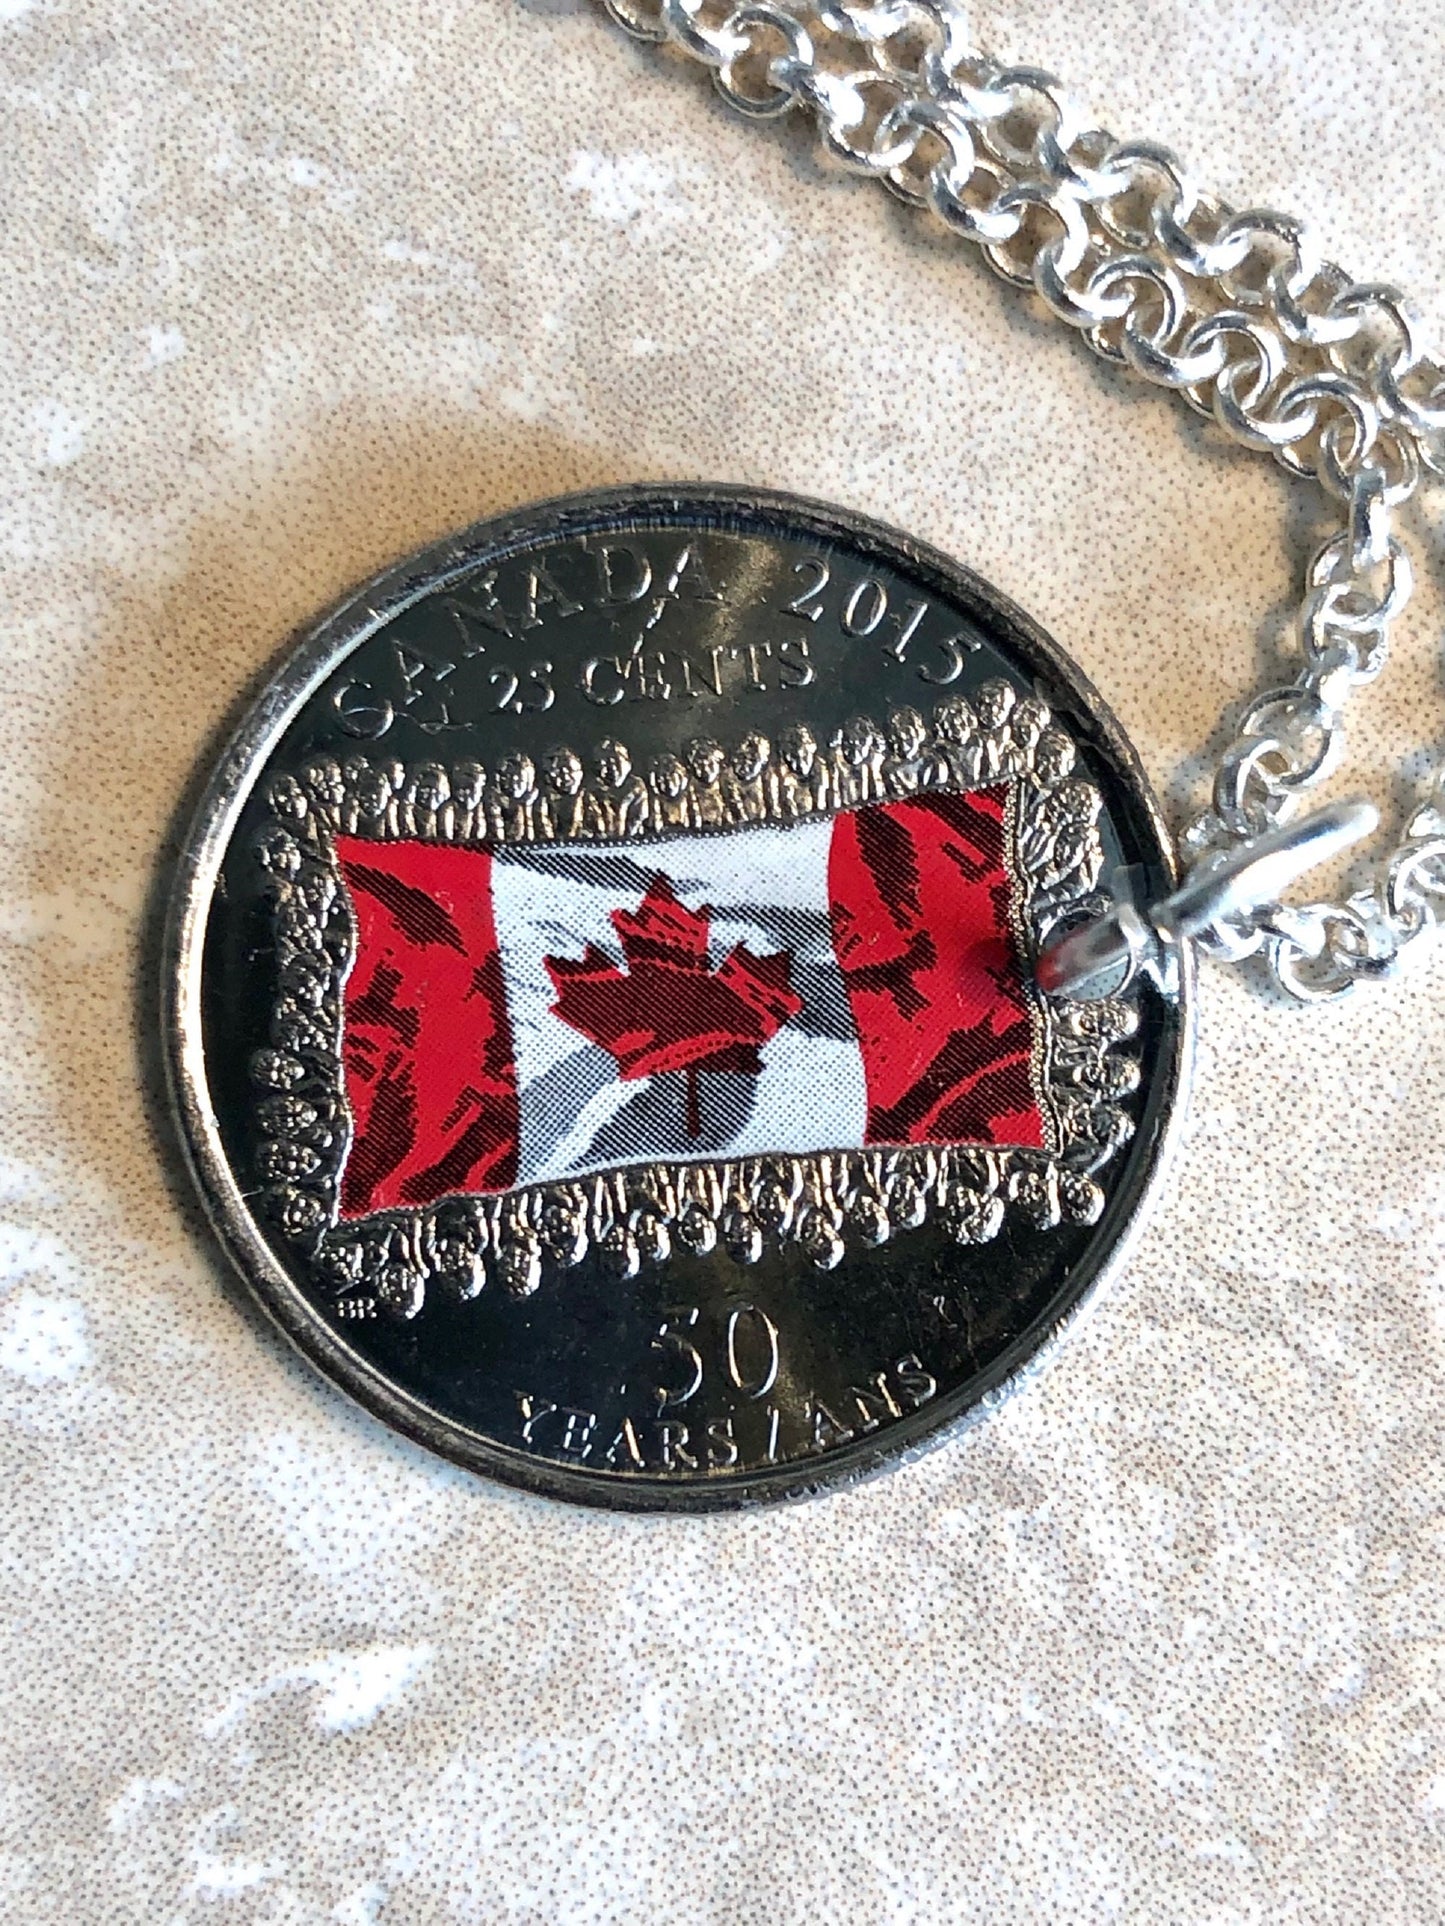 Canadian Quarter Coin Necklace Pendant Canada 2015 25 Cents Flag 50th Anniversary Custom Made Vintage and Rare coins - Coin Enthusiast